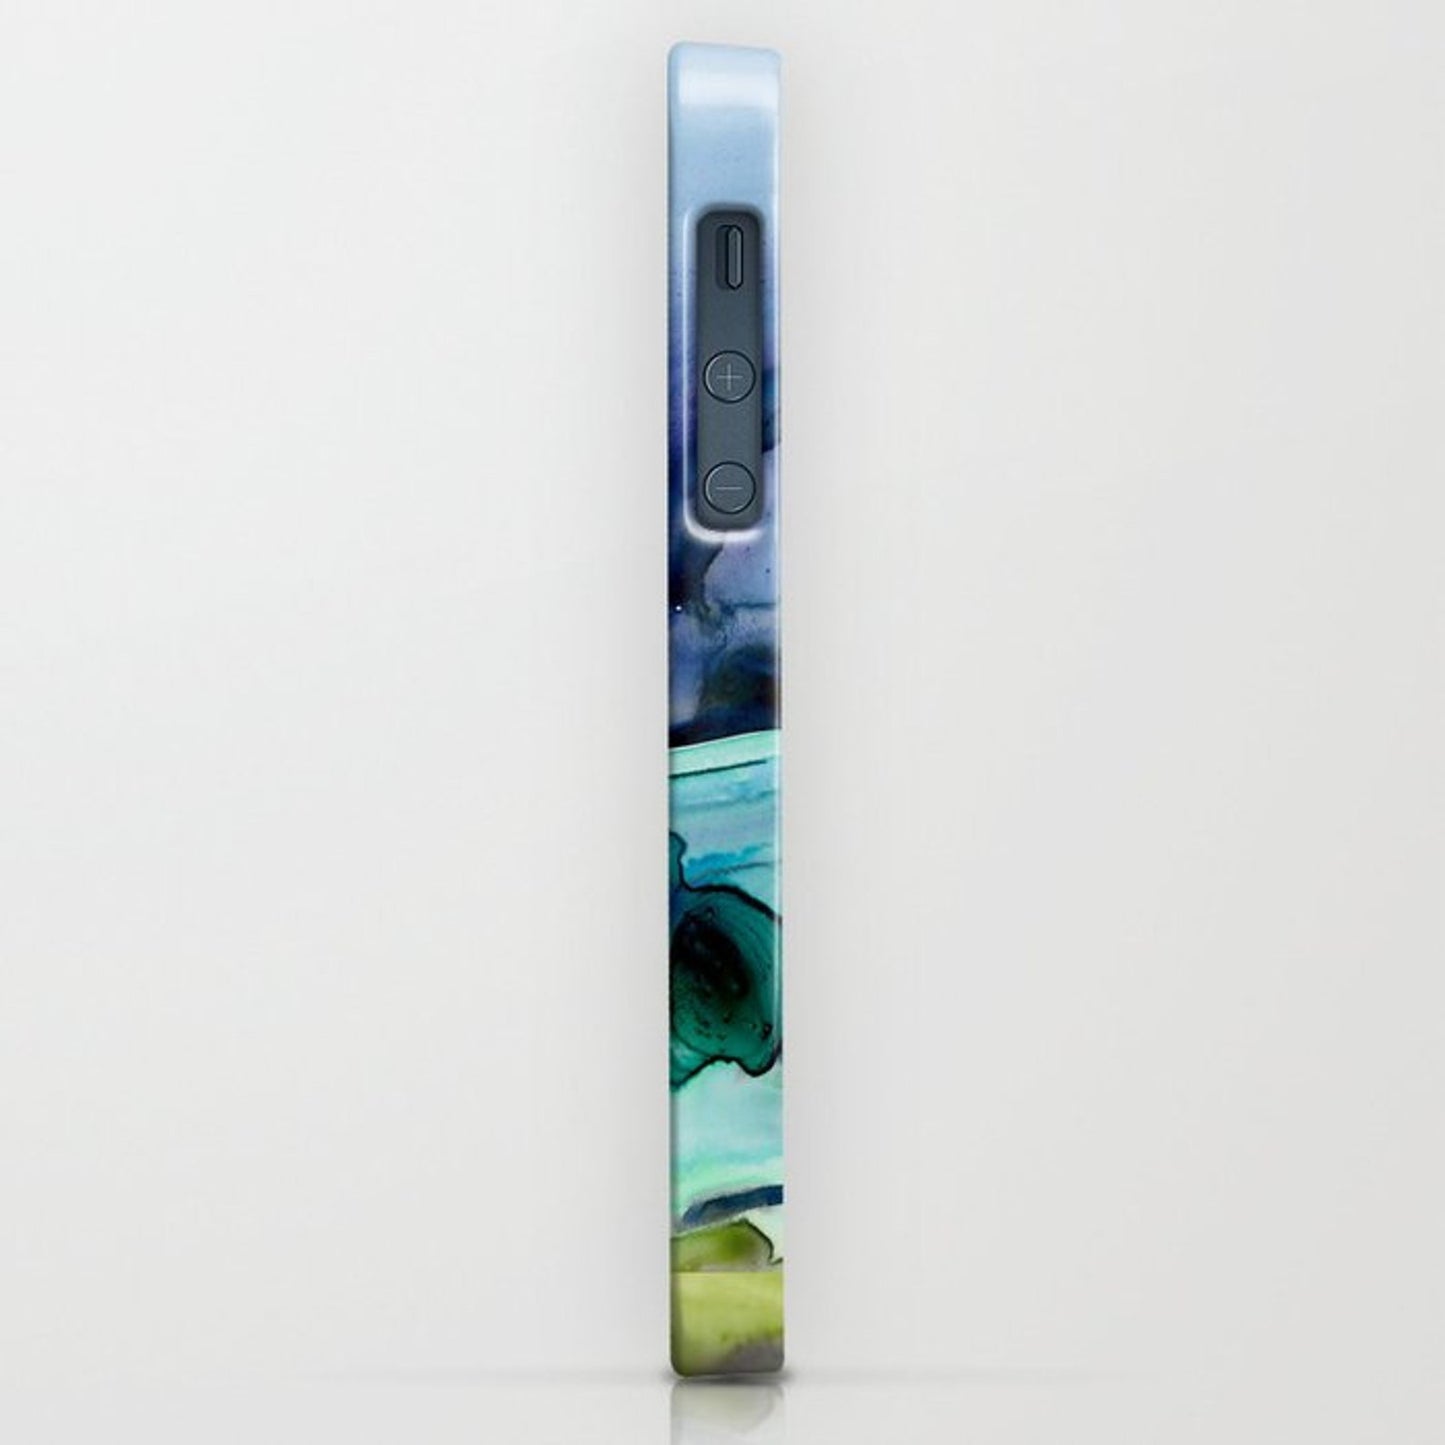 Abstract Vineyards Phone Case